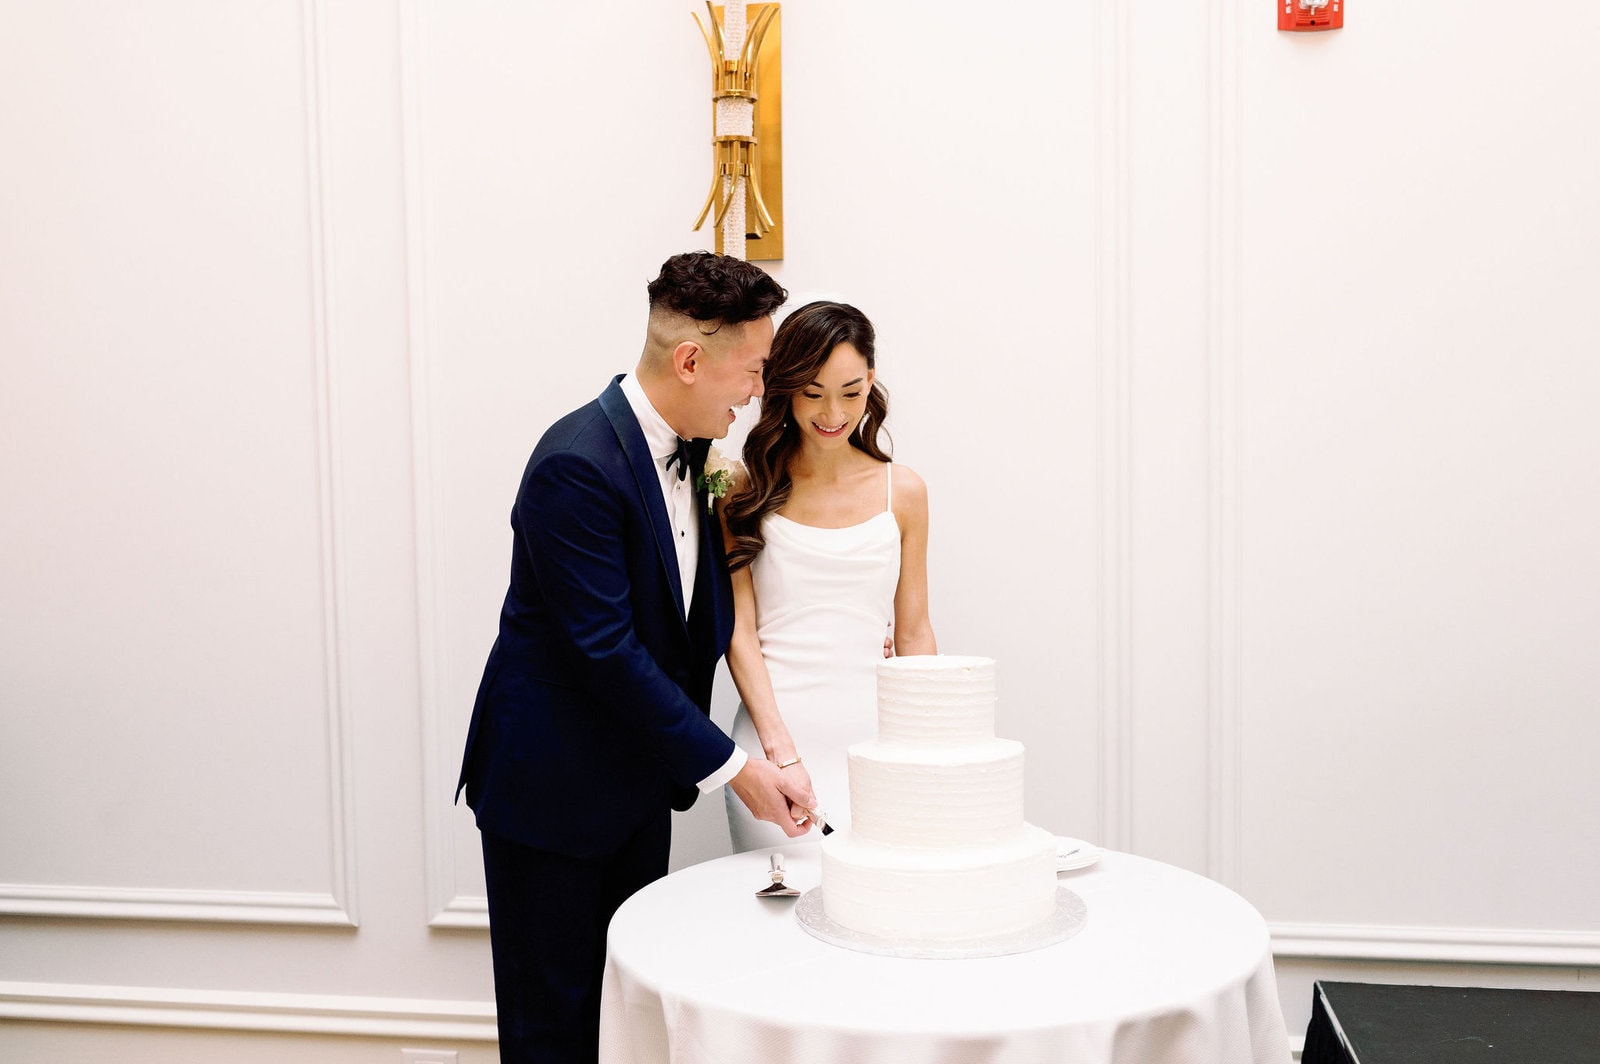 Couple Cuts Wedding Cake at Wedding Reception, Modern Romantic Summer Intimate Elopement Jacqueline James Photography